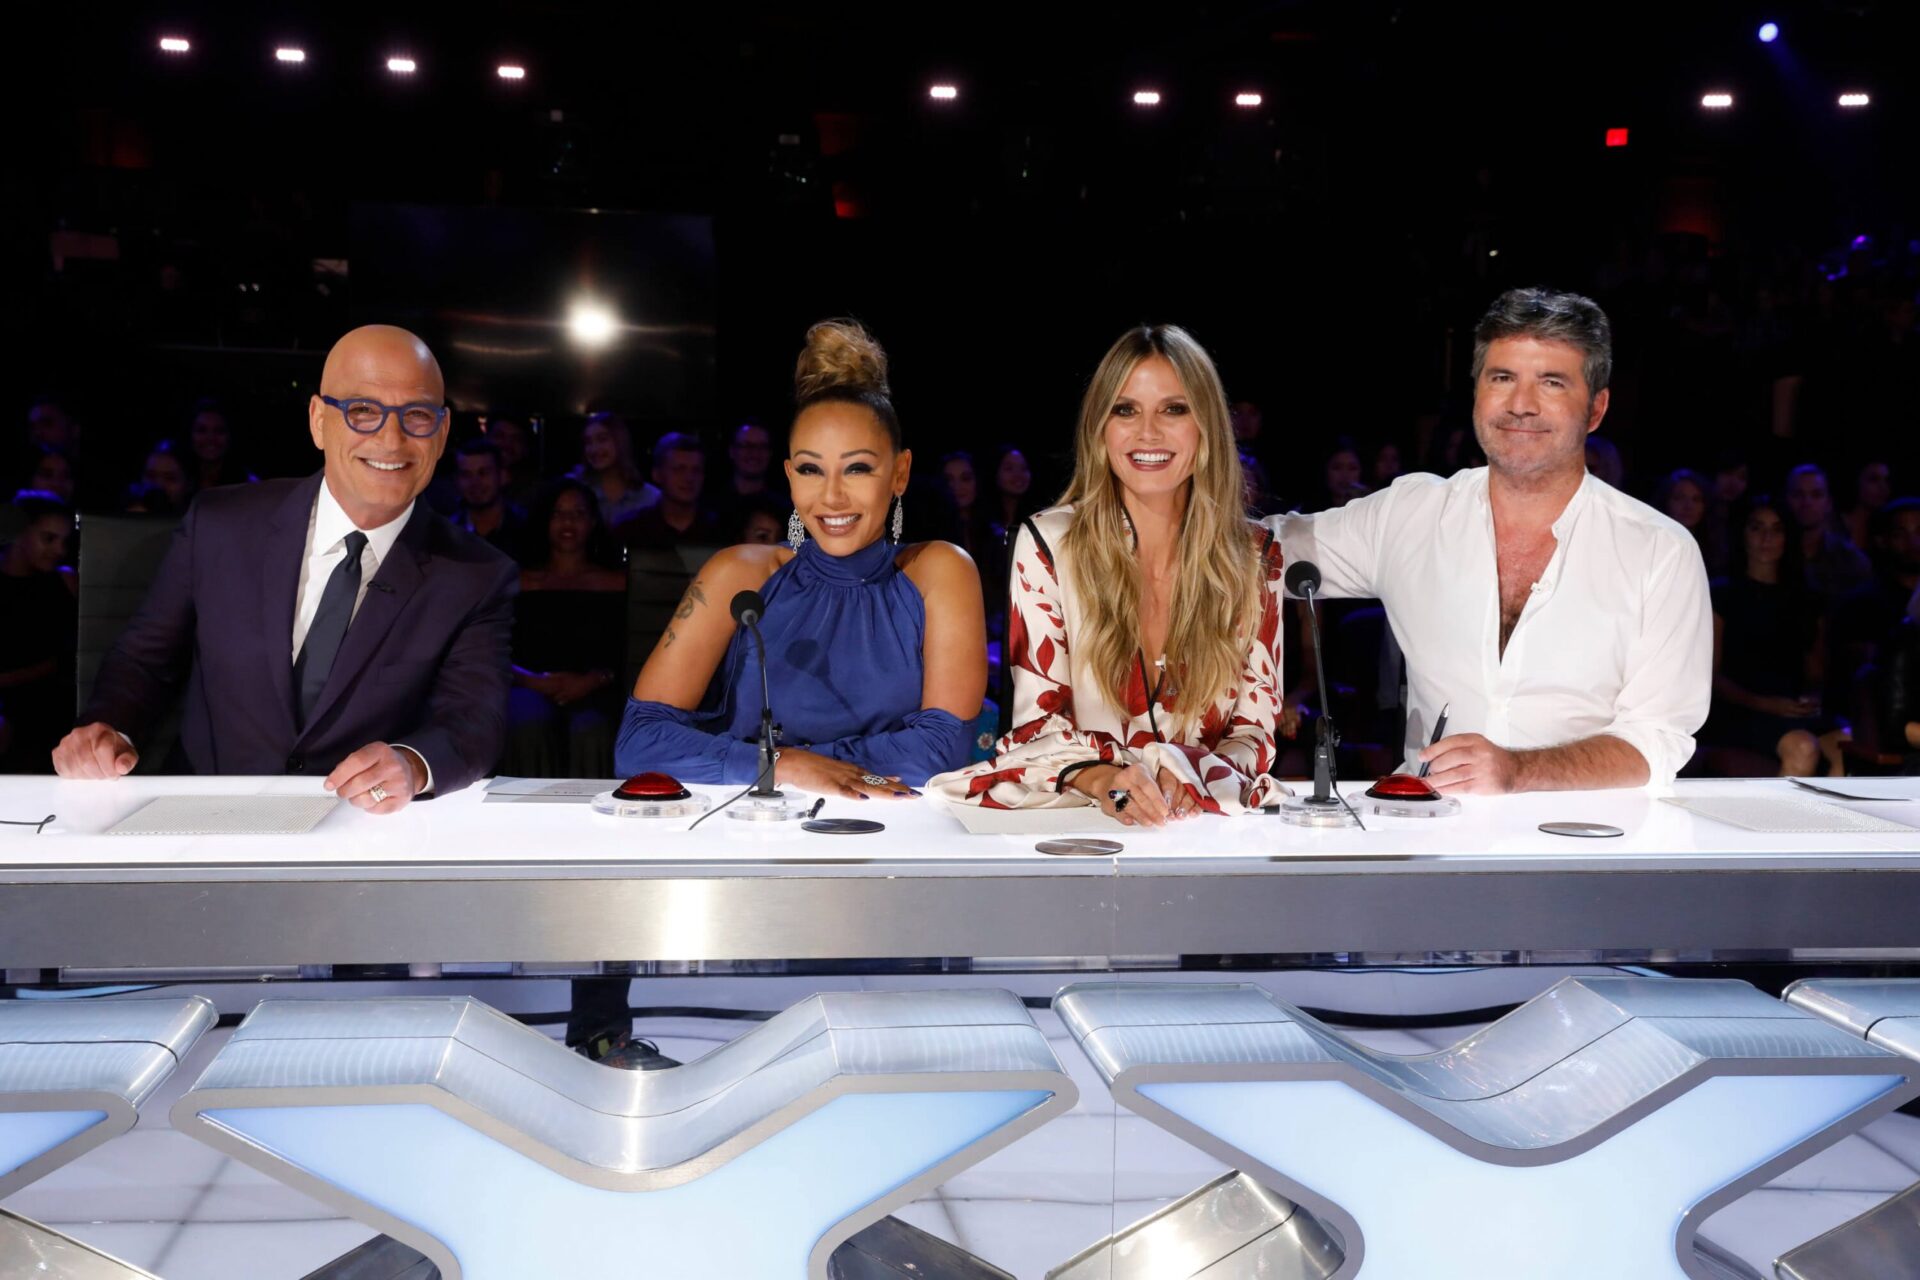 ‘America’s Got Talent’ Auditions Kick Off Later This Week